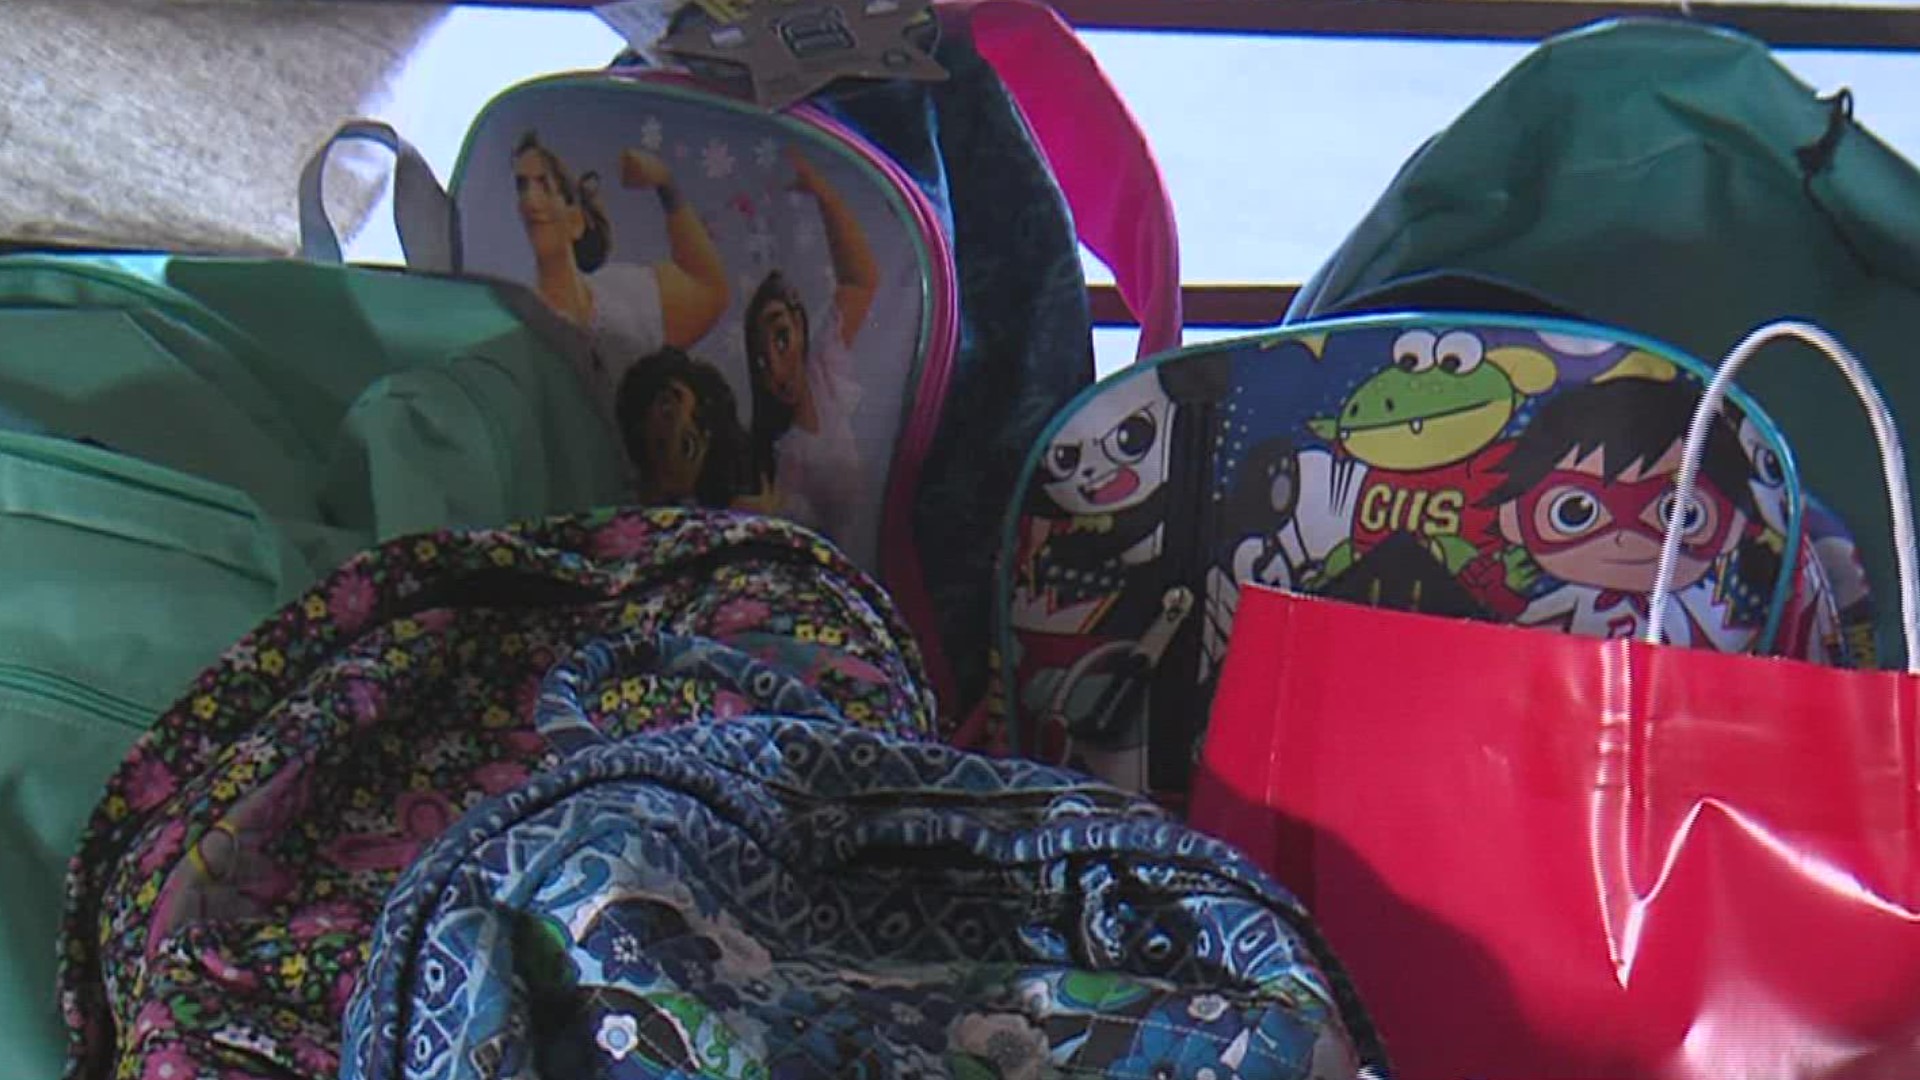 Organizers told 3NEWS they wanted to get a jump on the back to school drives that happen in our area to get CASA off to a great start.